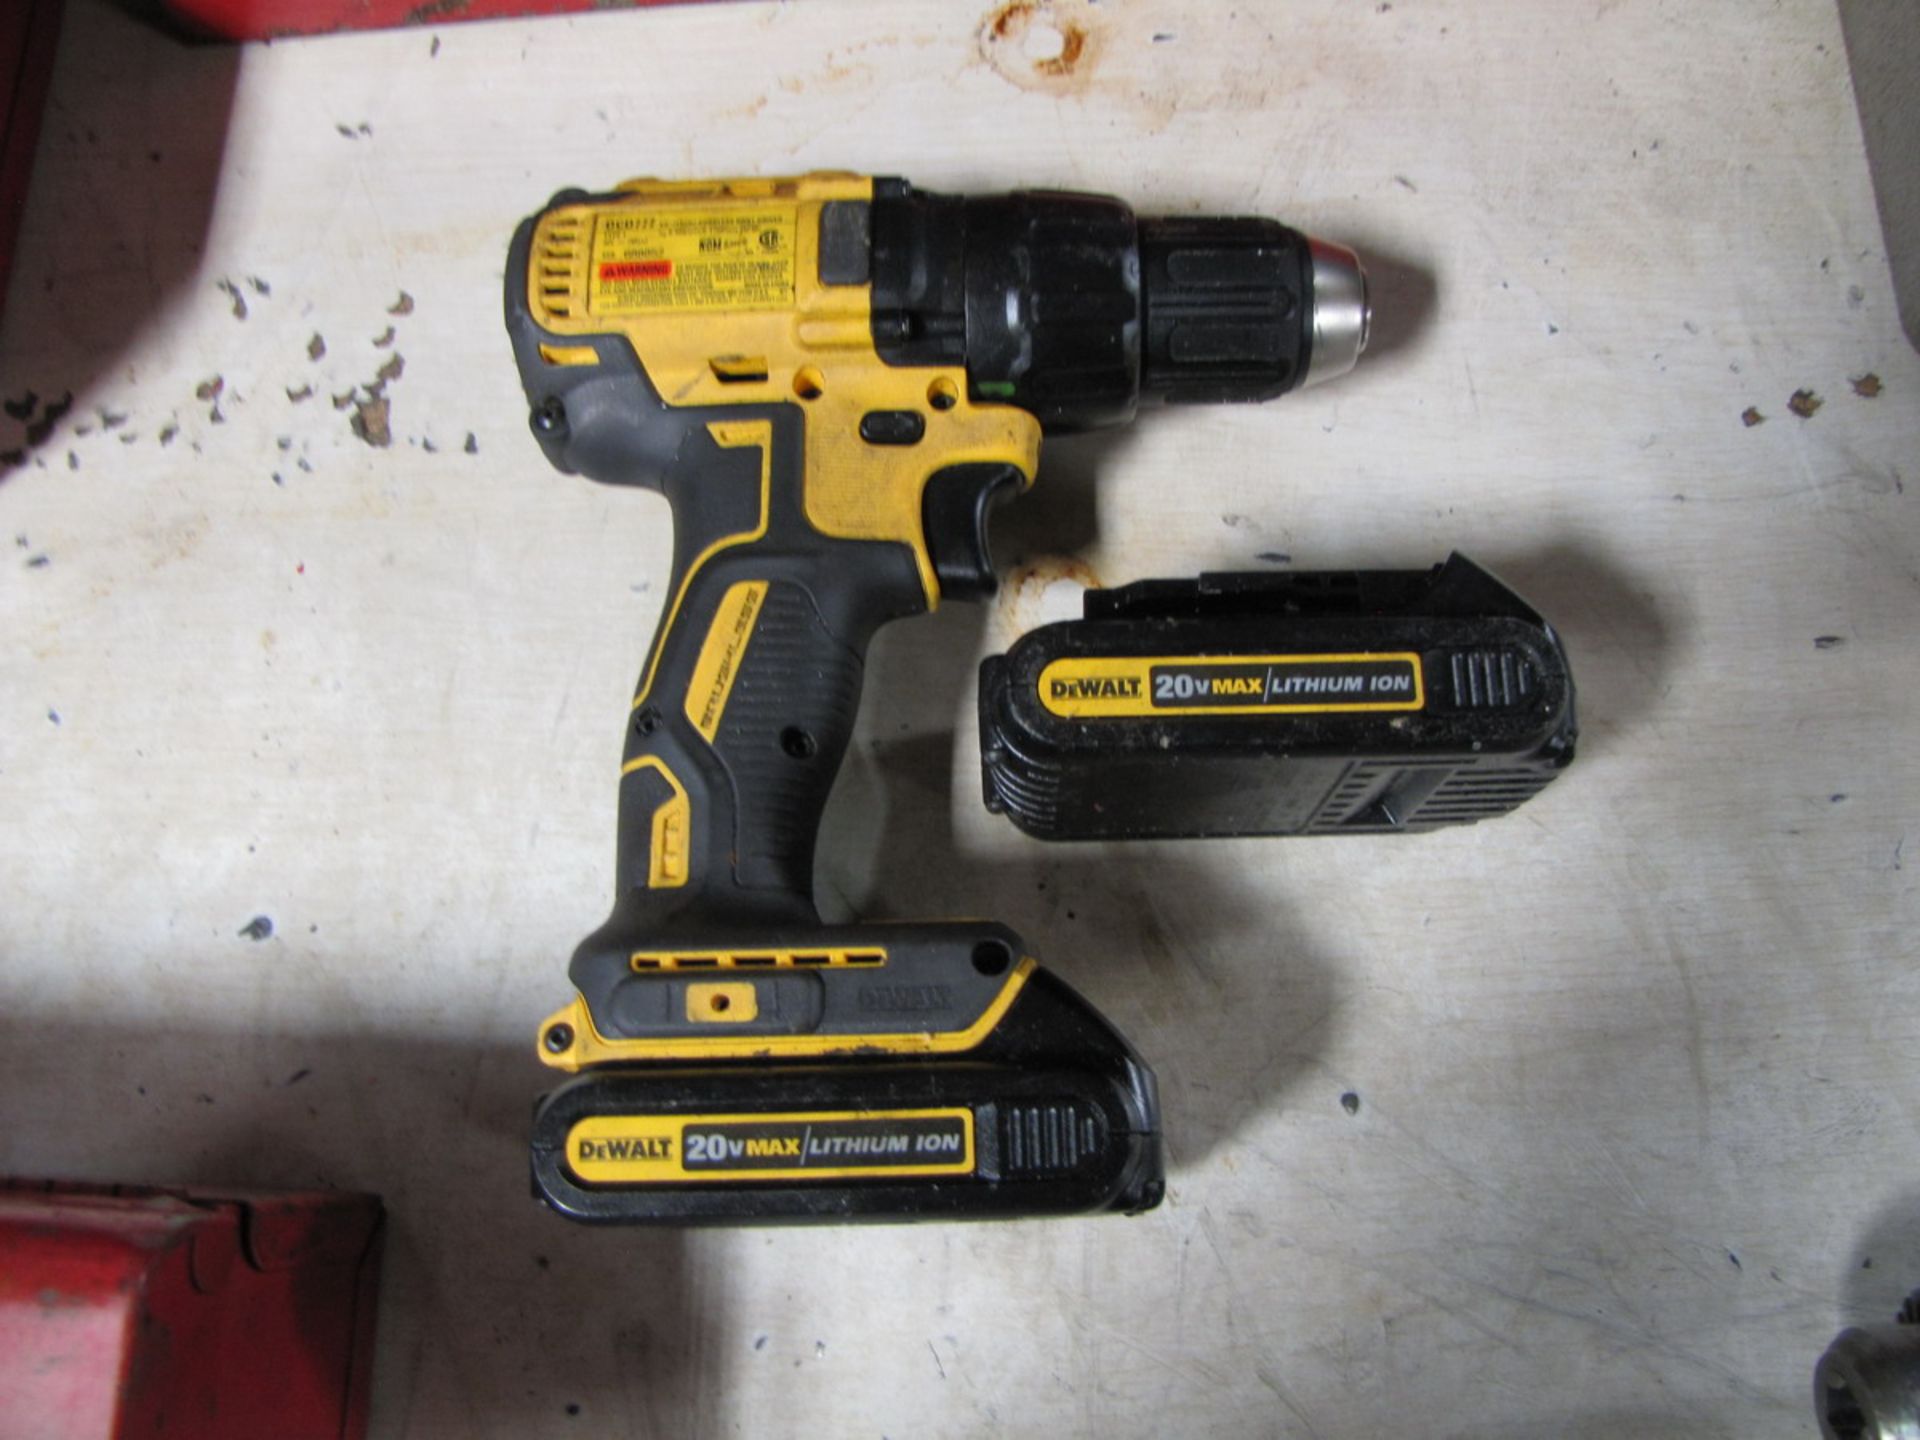 DeWalt Model DCD777 1/2 in. Cordless Drill Driver with (2) 20V Lithium Ion Batteries, (1) Battery